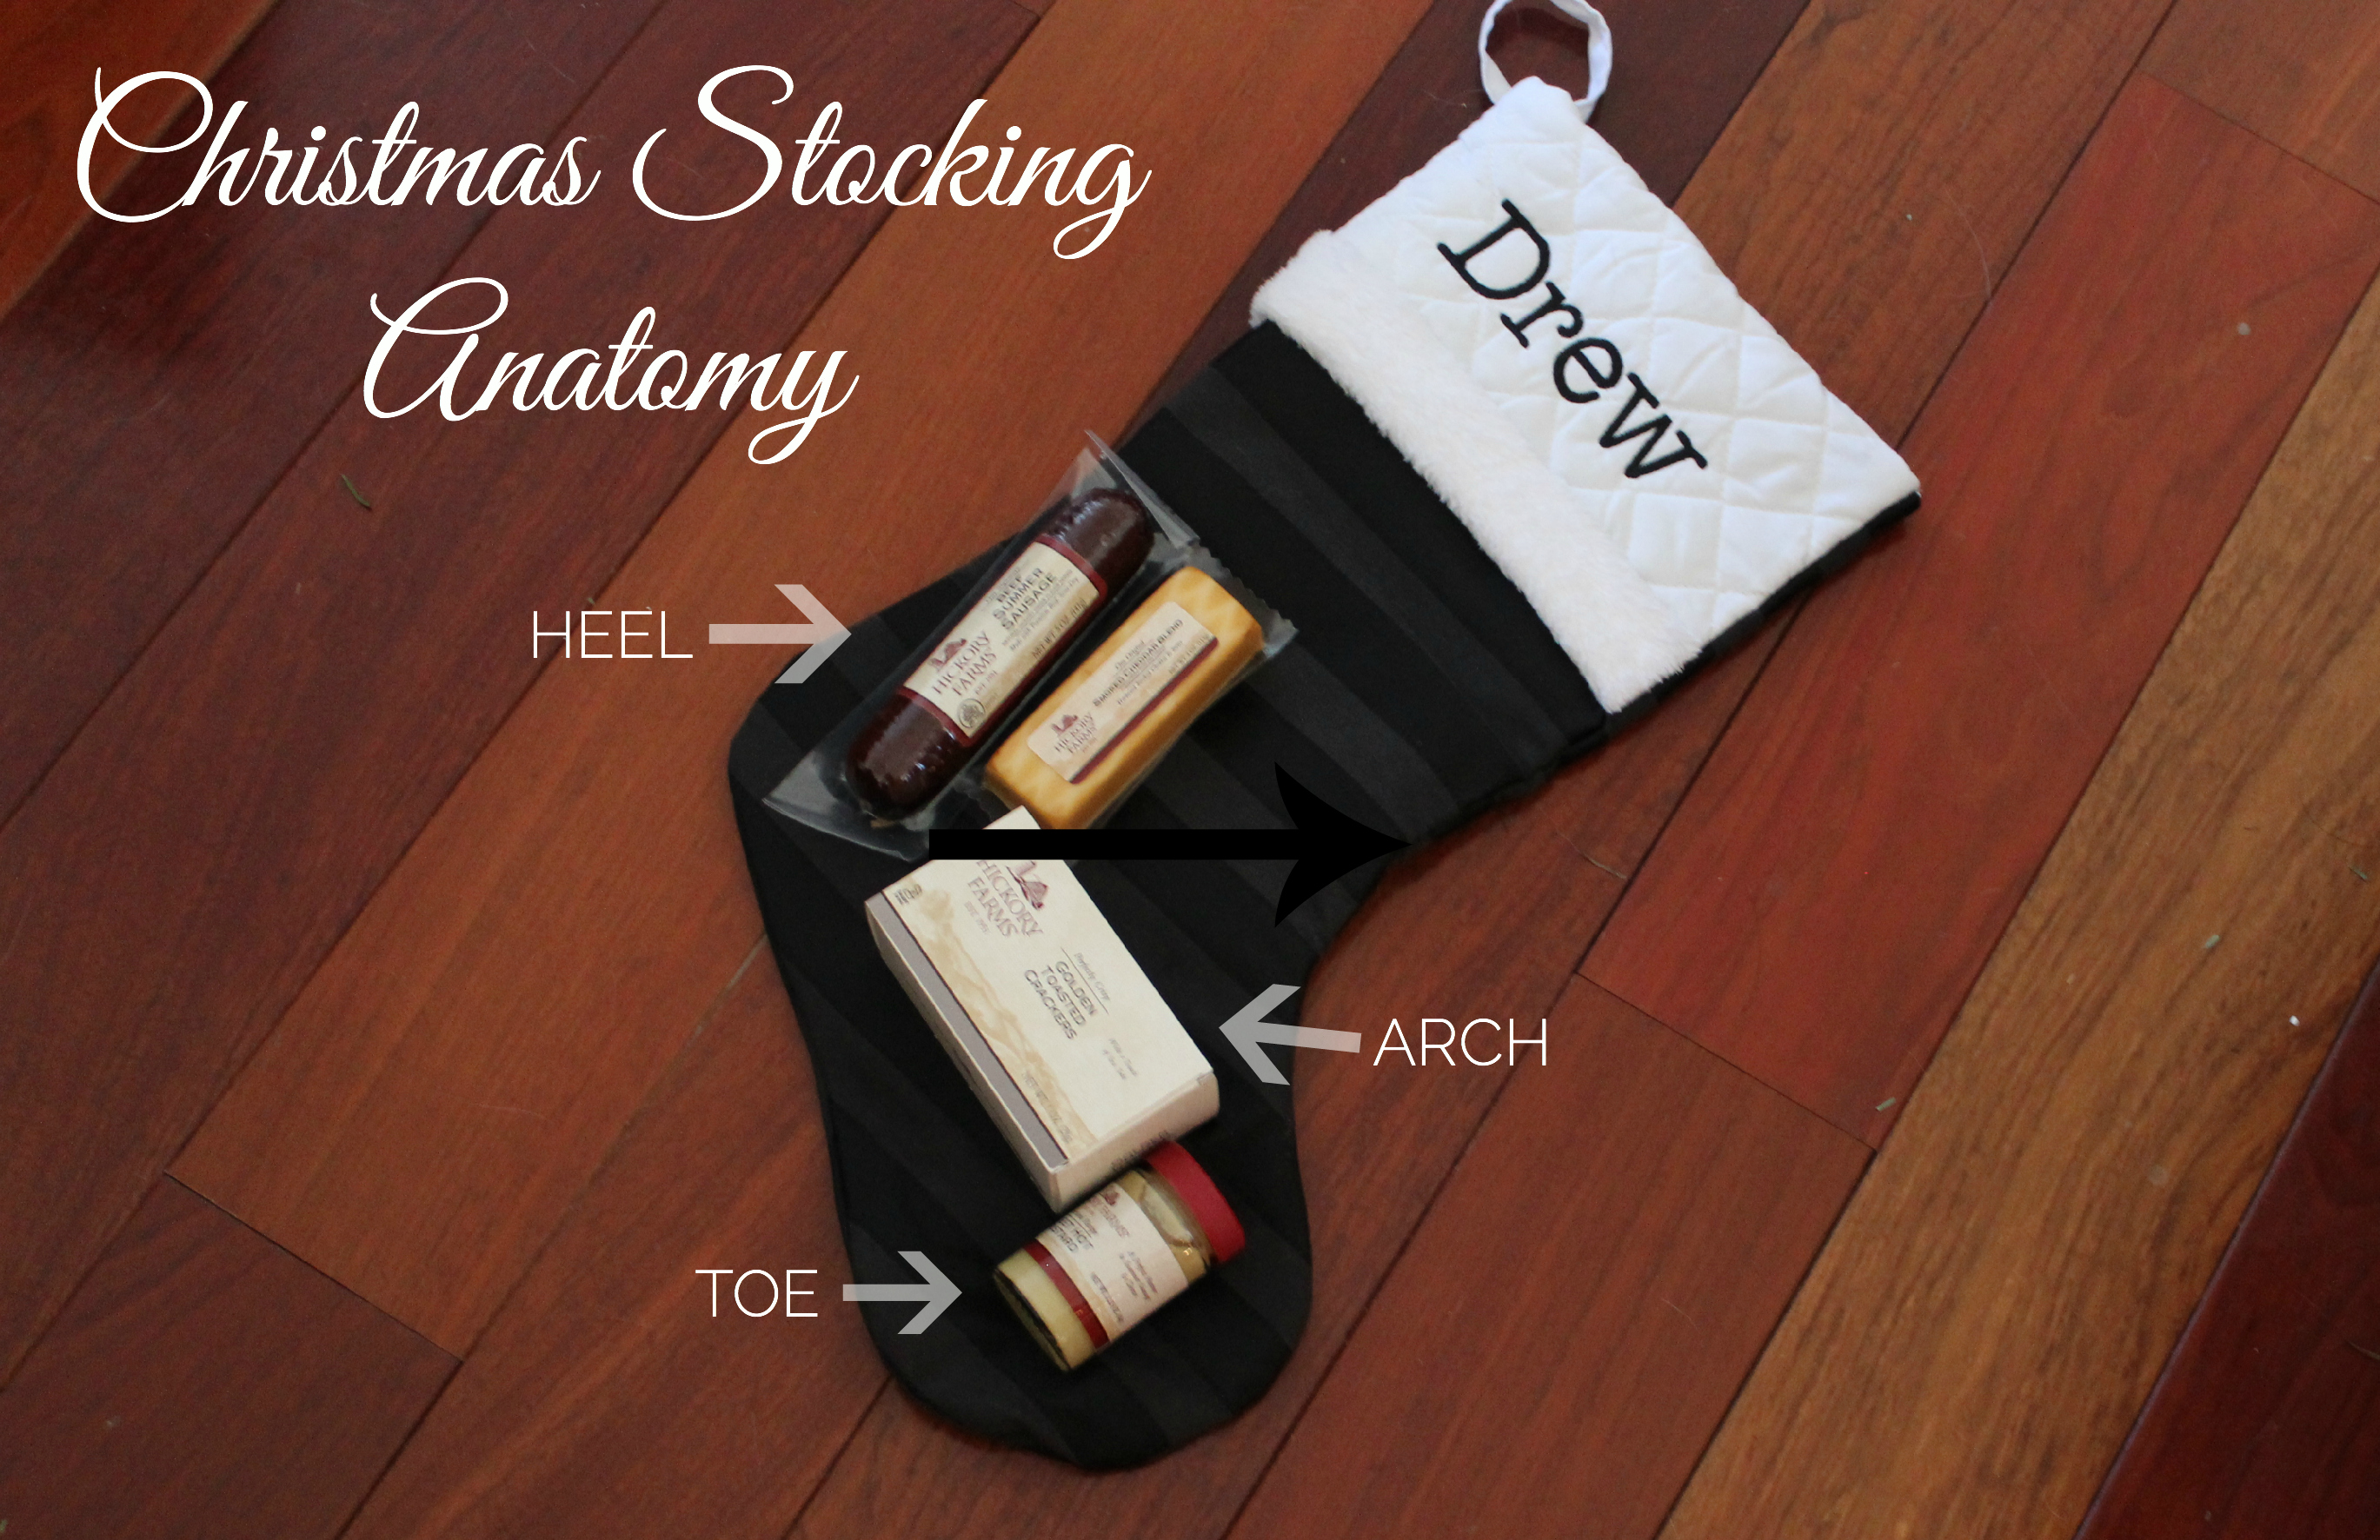 The anatomy of a perfectly stuffed Christmas stocking.